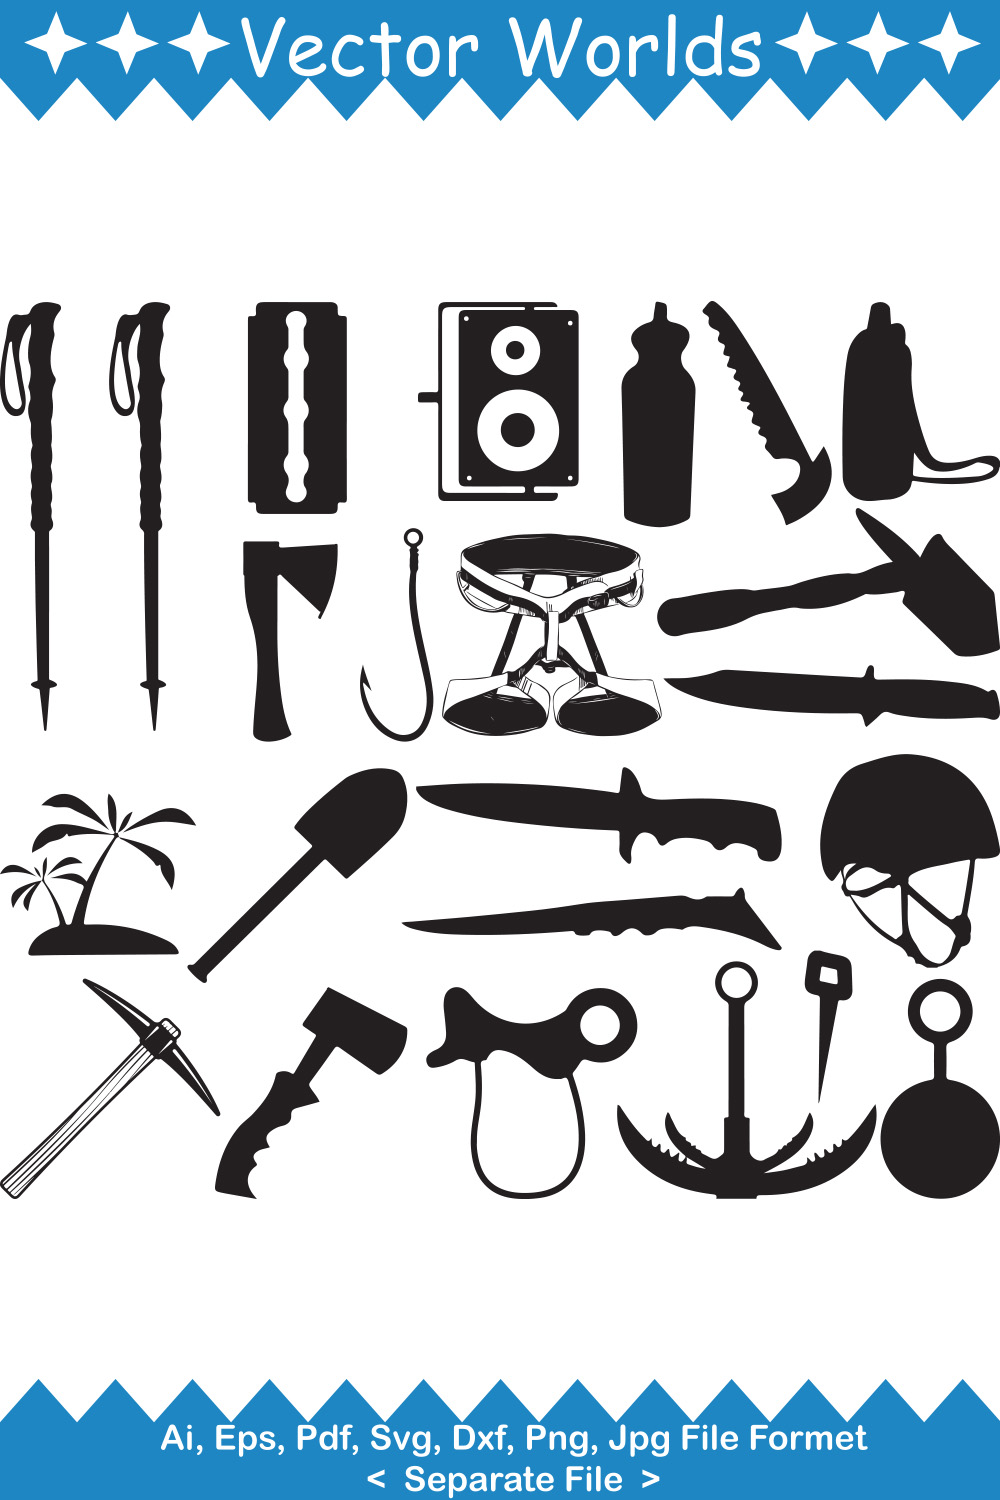 Bundle of vector irresistible images of mountaineers tool silhouettes.